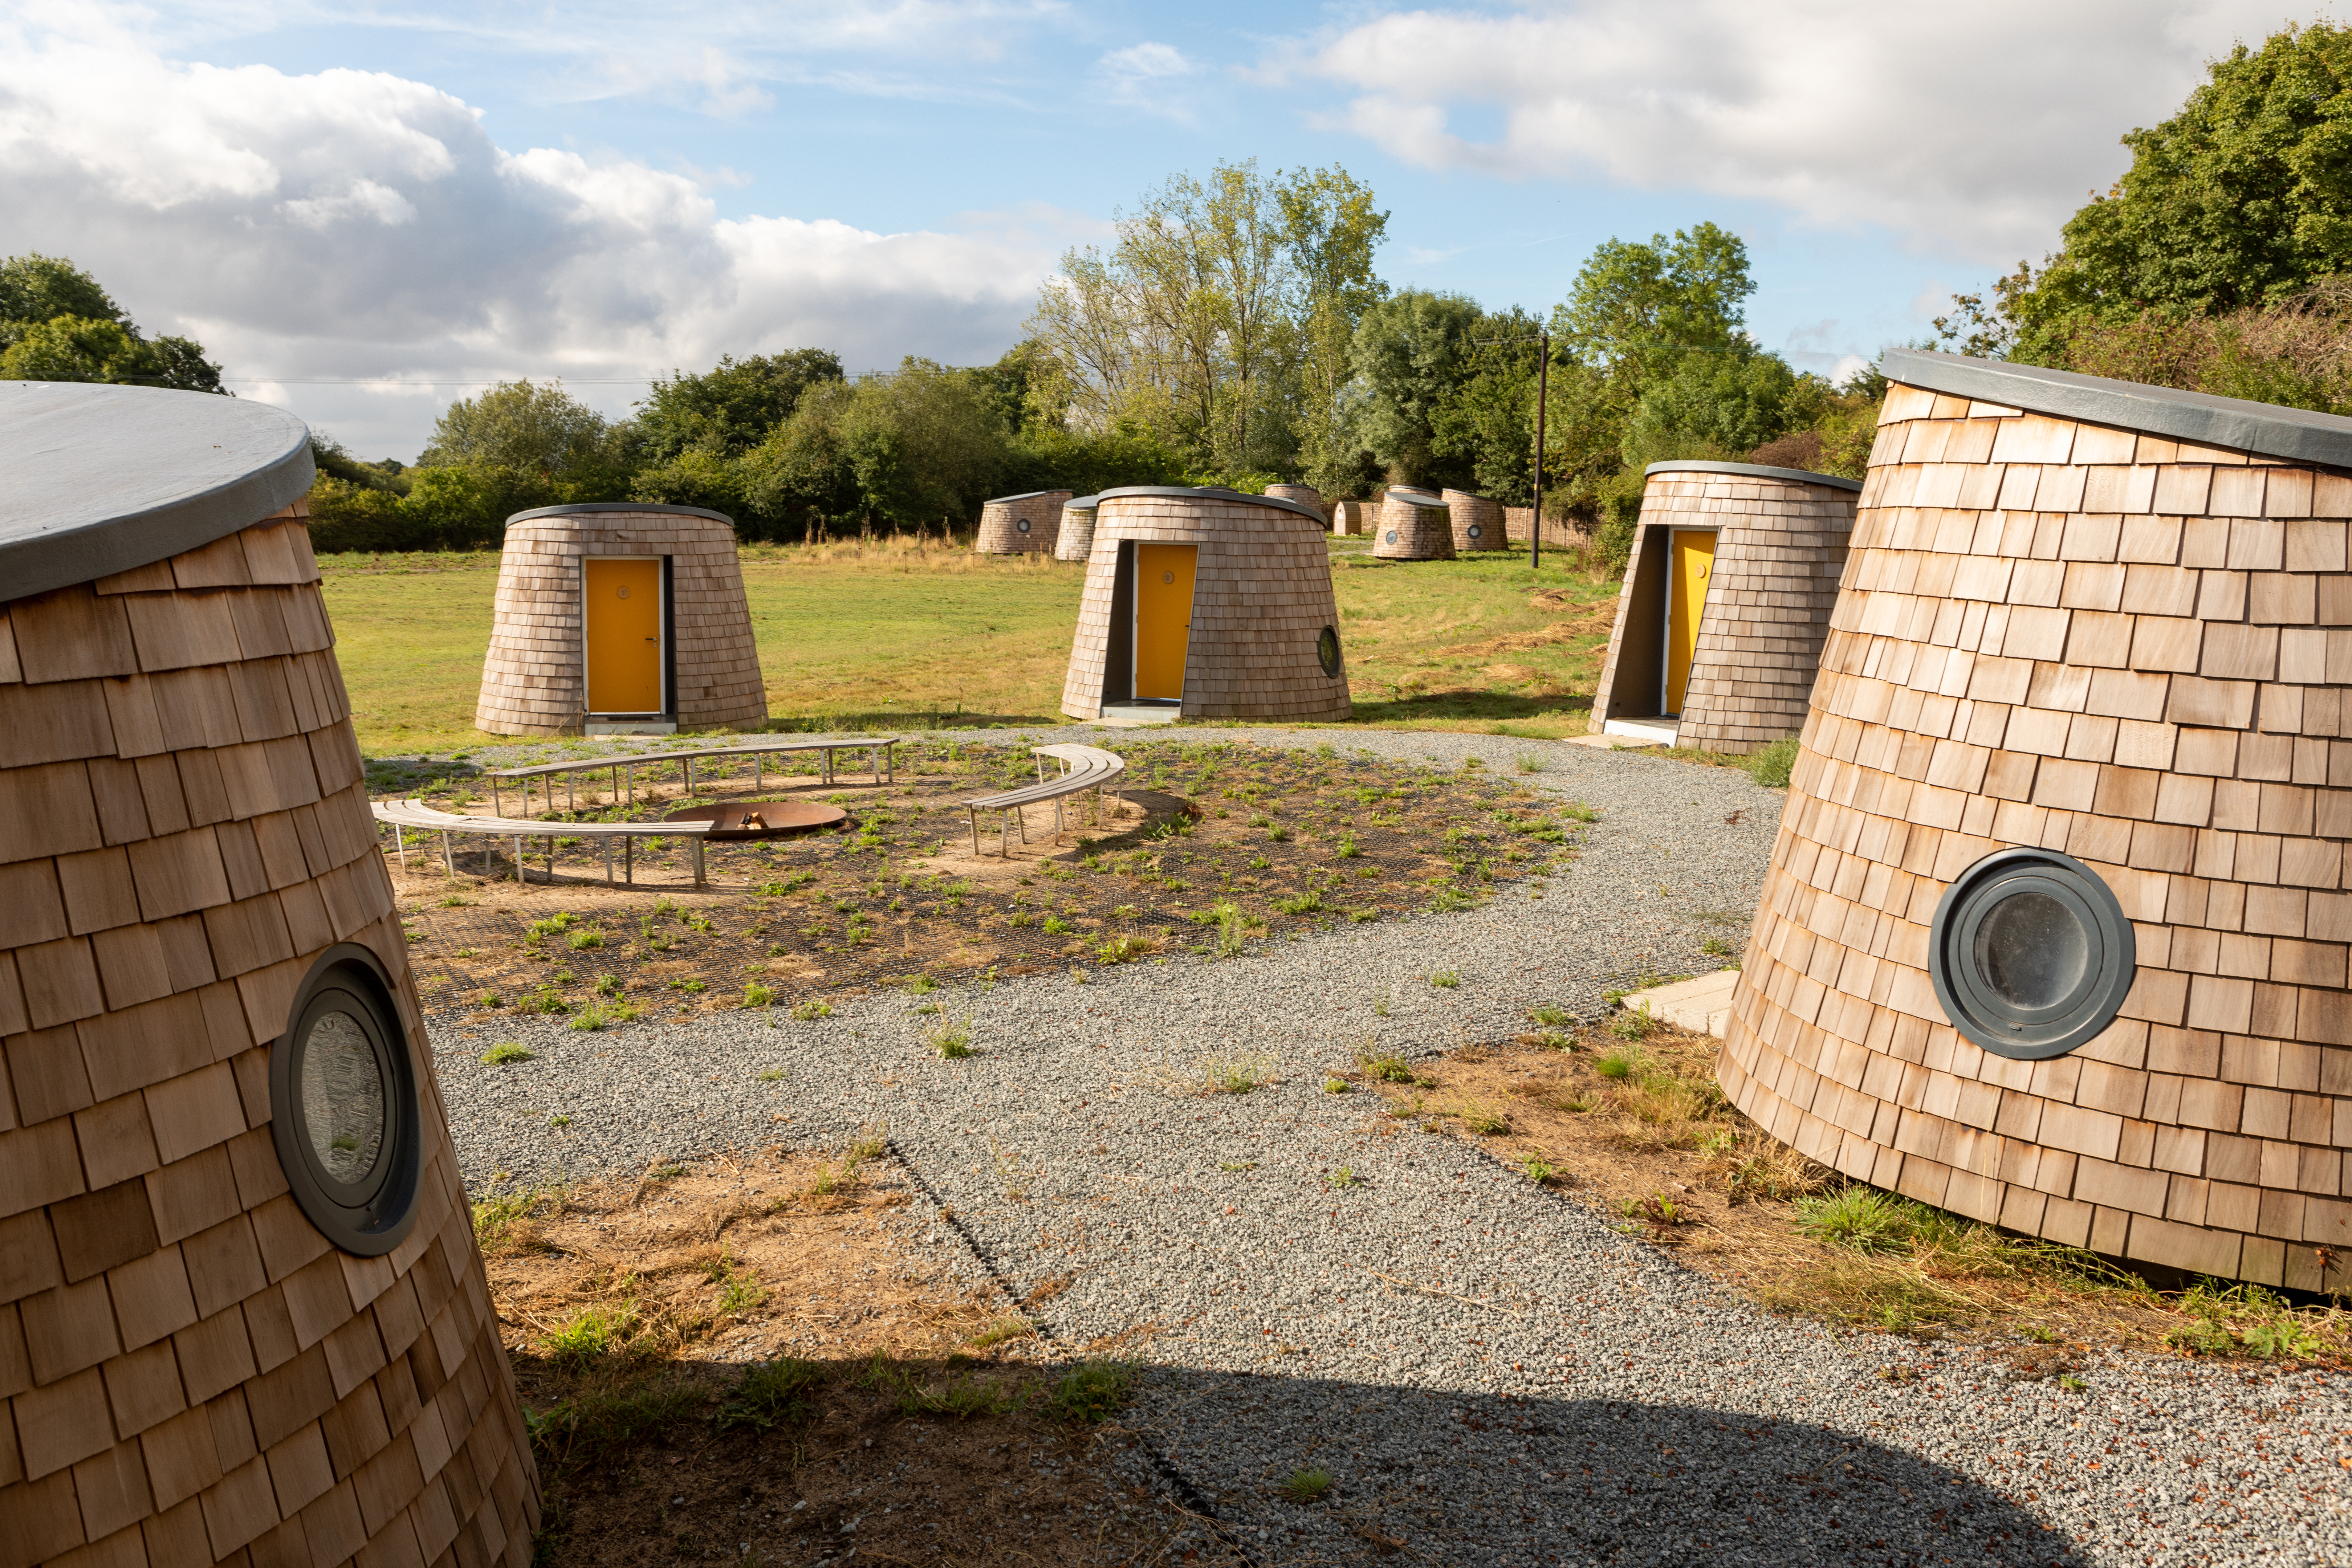 Image of the hive pods children stay in when on residential visits 